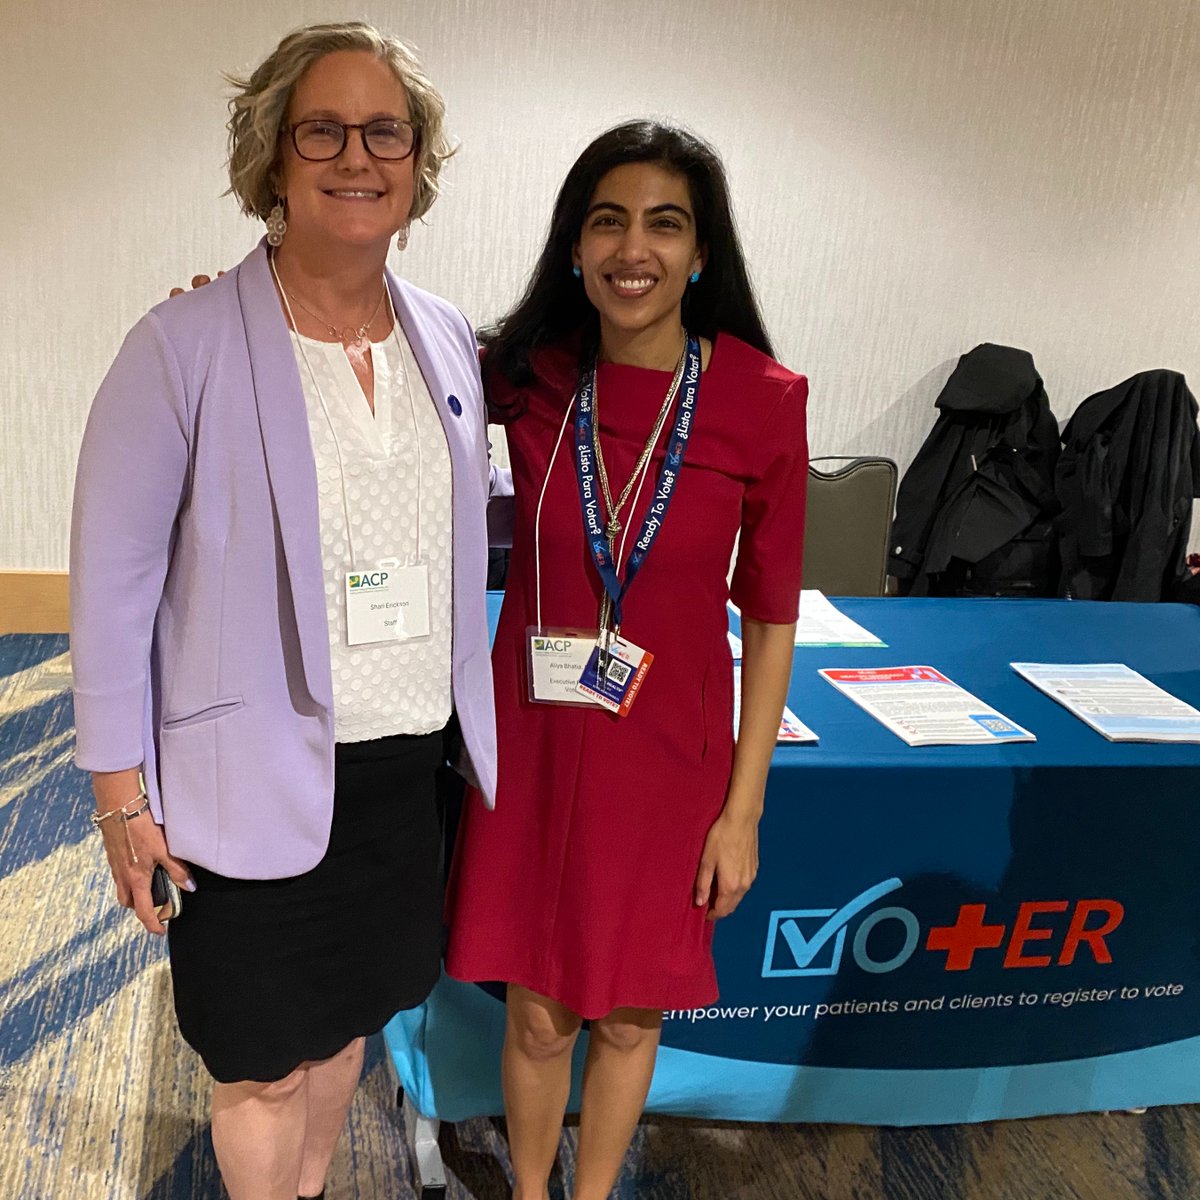 Vot-ER shined at the @ACPIMPhysicians Leadership Day! 🌟 We had the pleasure of meeting @SEricksonACP SVP of Gov Affairs & Dr.Sophie Kramer from @WisconsinACP at Vot-ER we believe that civic participation is an essential part of healthy communities. - #ACPLD #IMProud